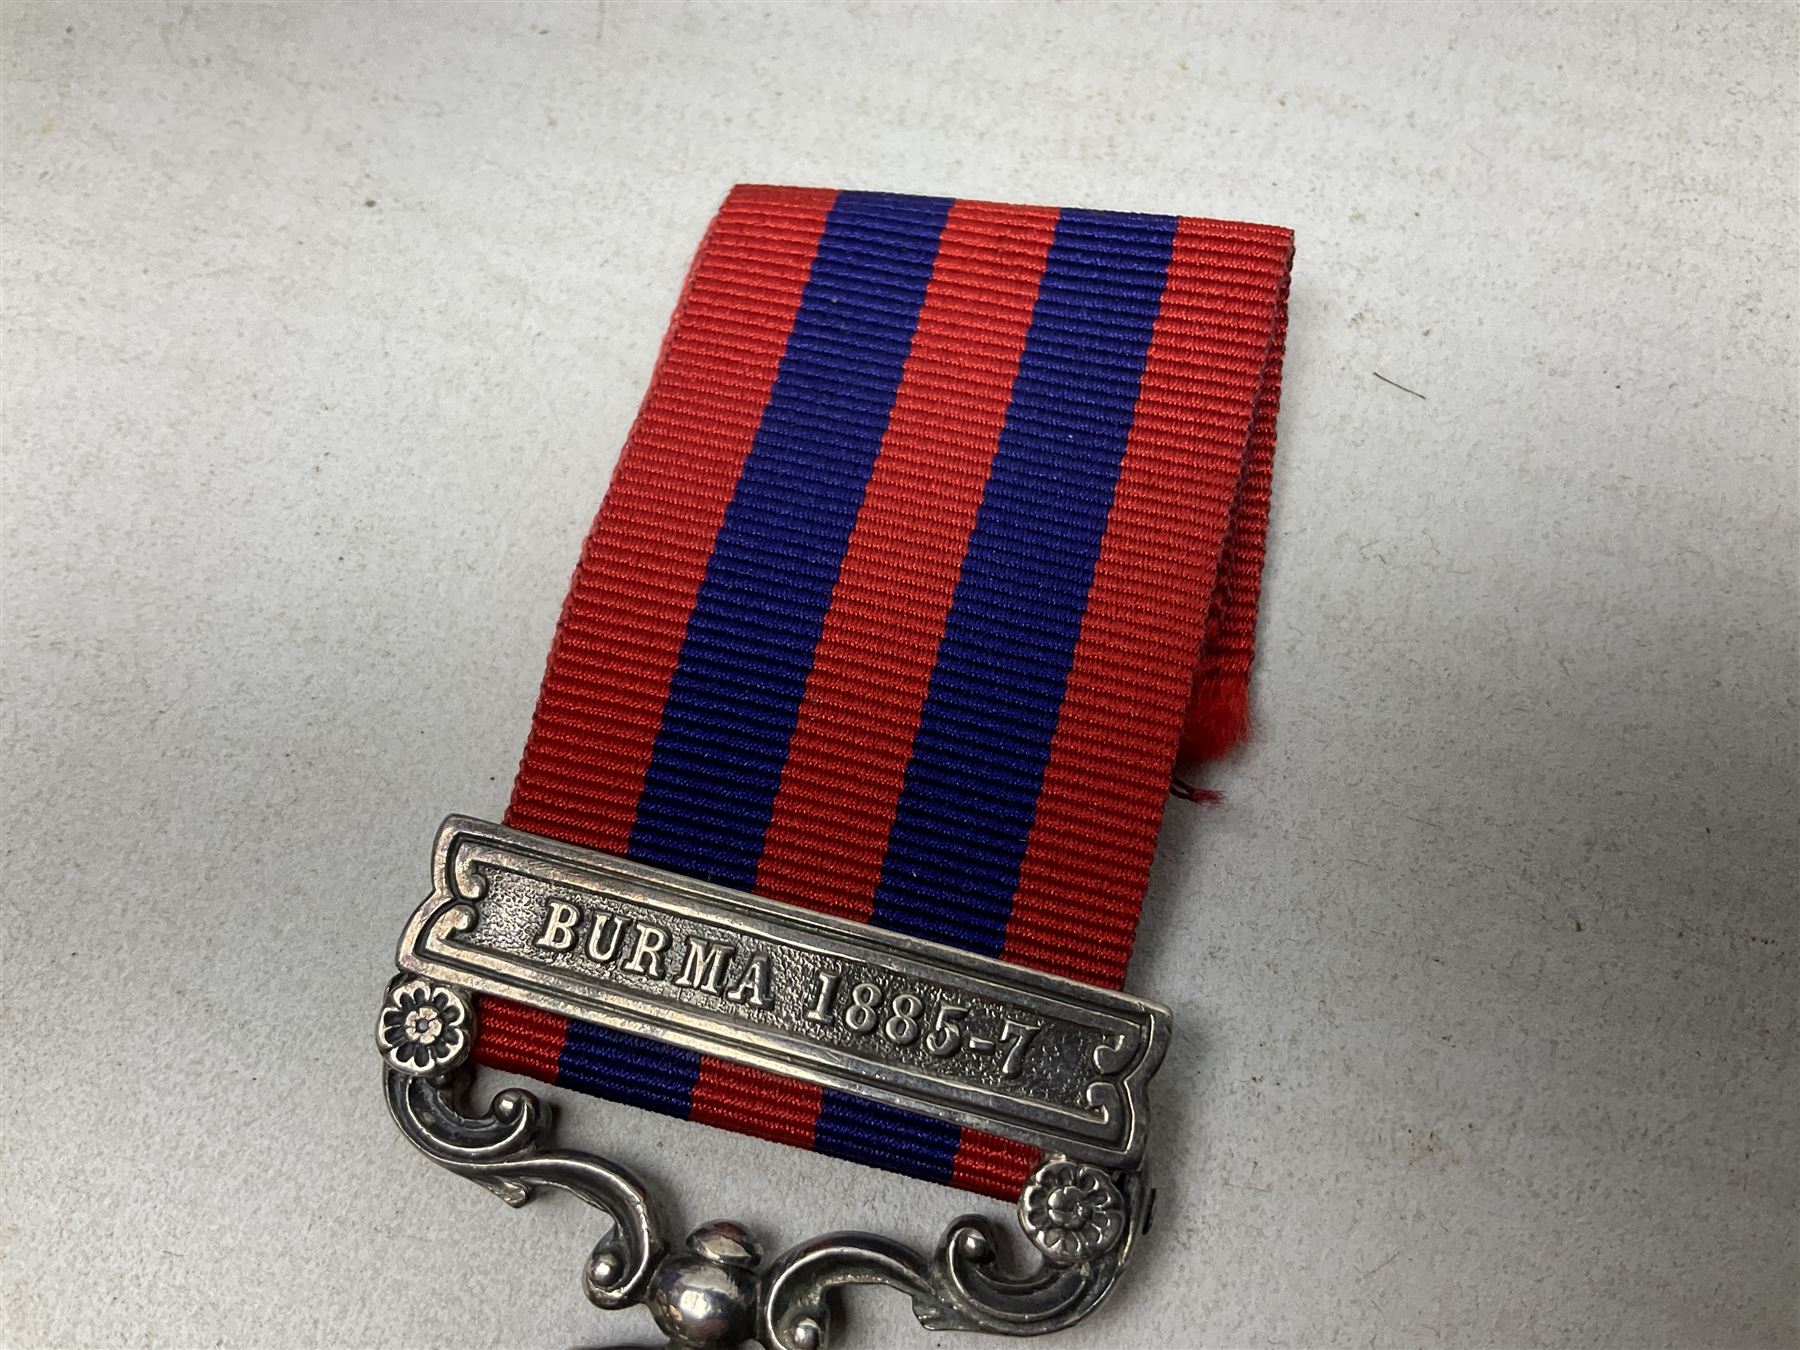 Victoria India General Service Medal with Burma 1885-7 clasp awarded to 1771 Pte. W. Alderman 2nd Bn - Image 3 of 10